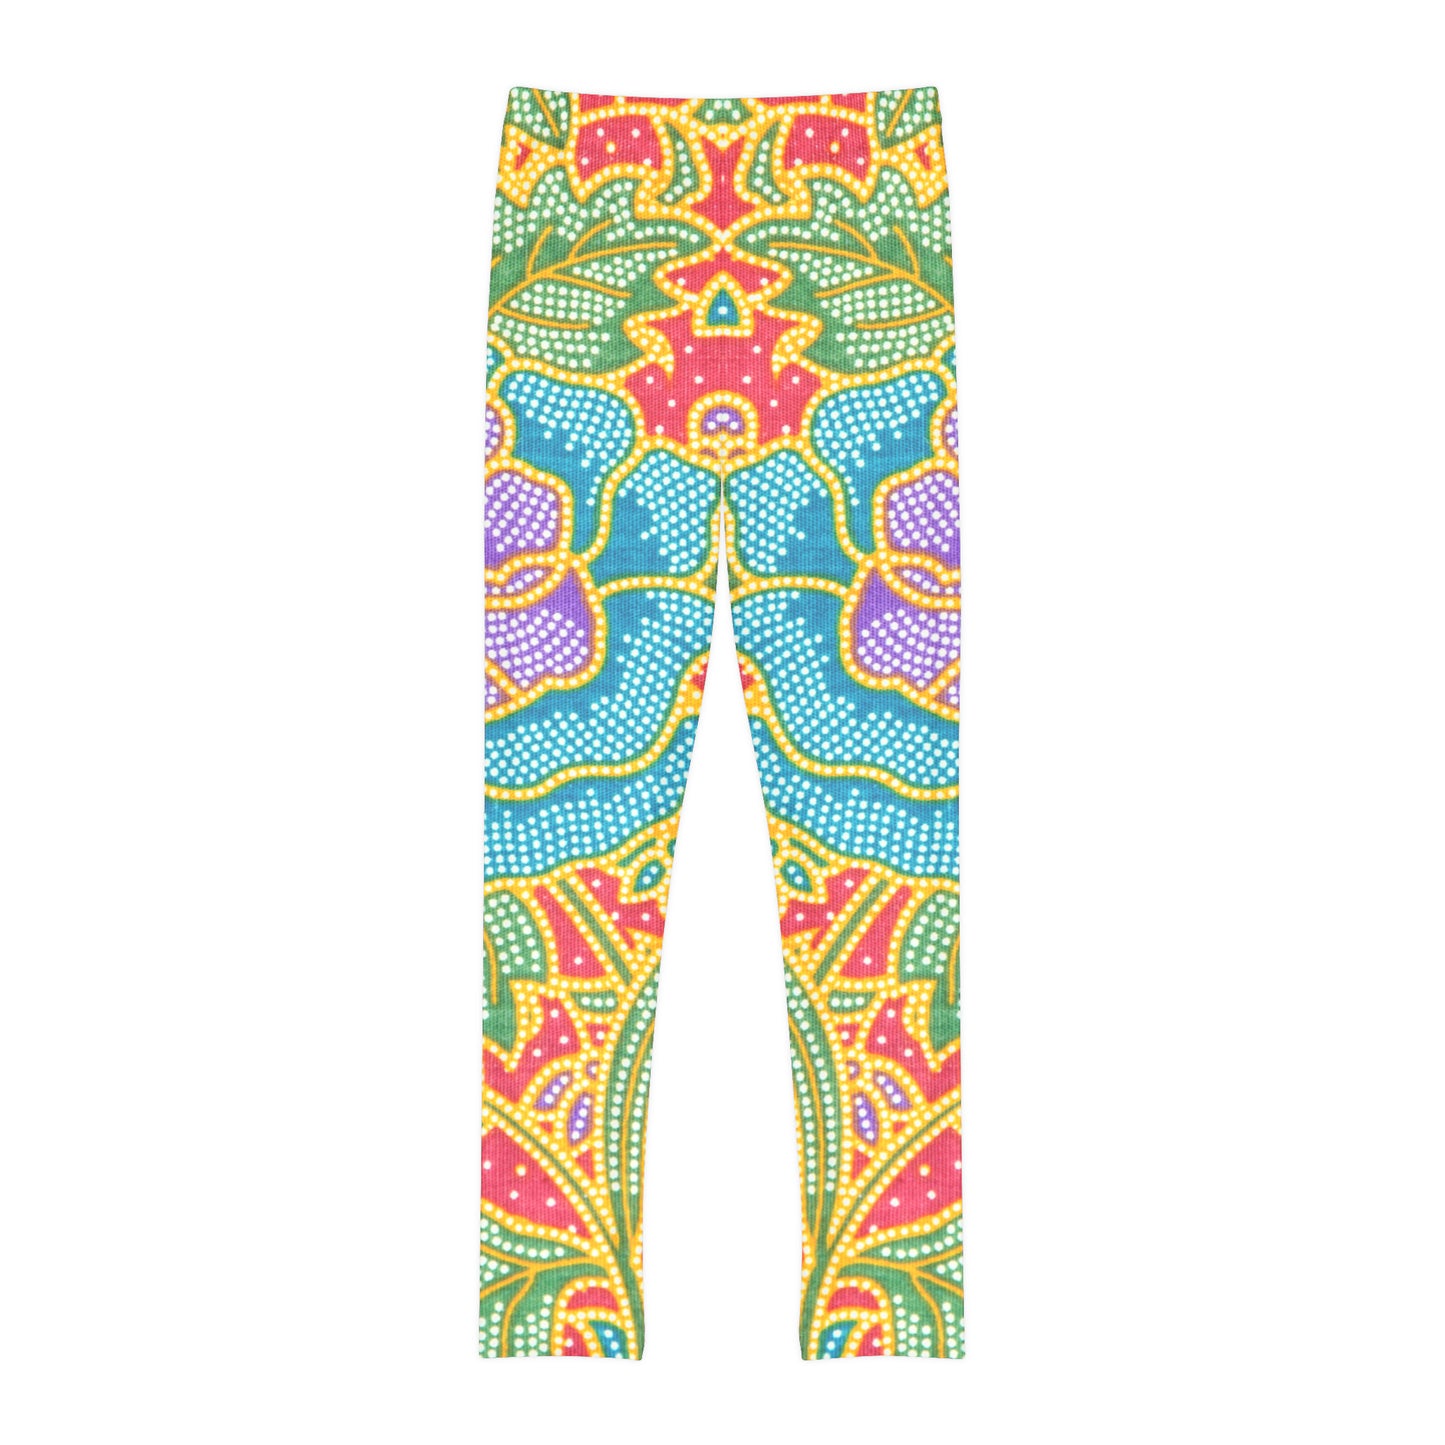 Green and red flowers - Inovax Youth Full-Length Leggings